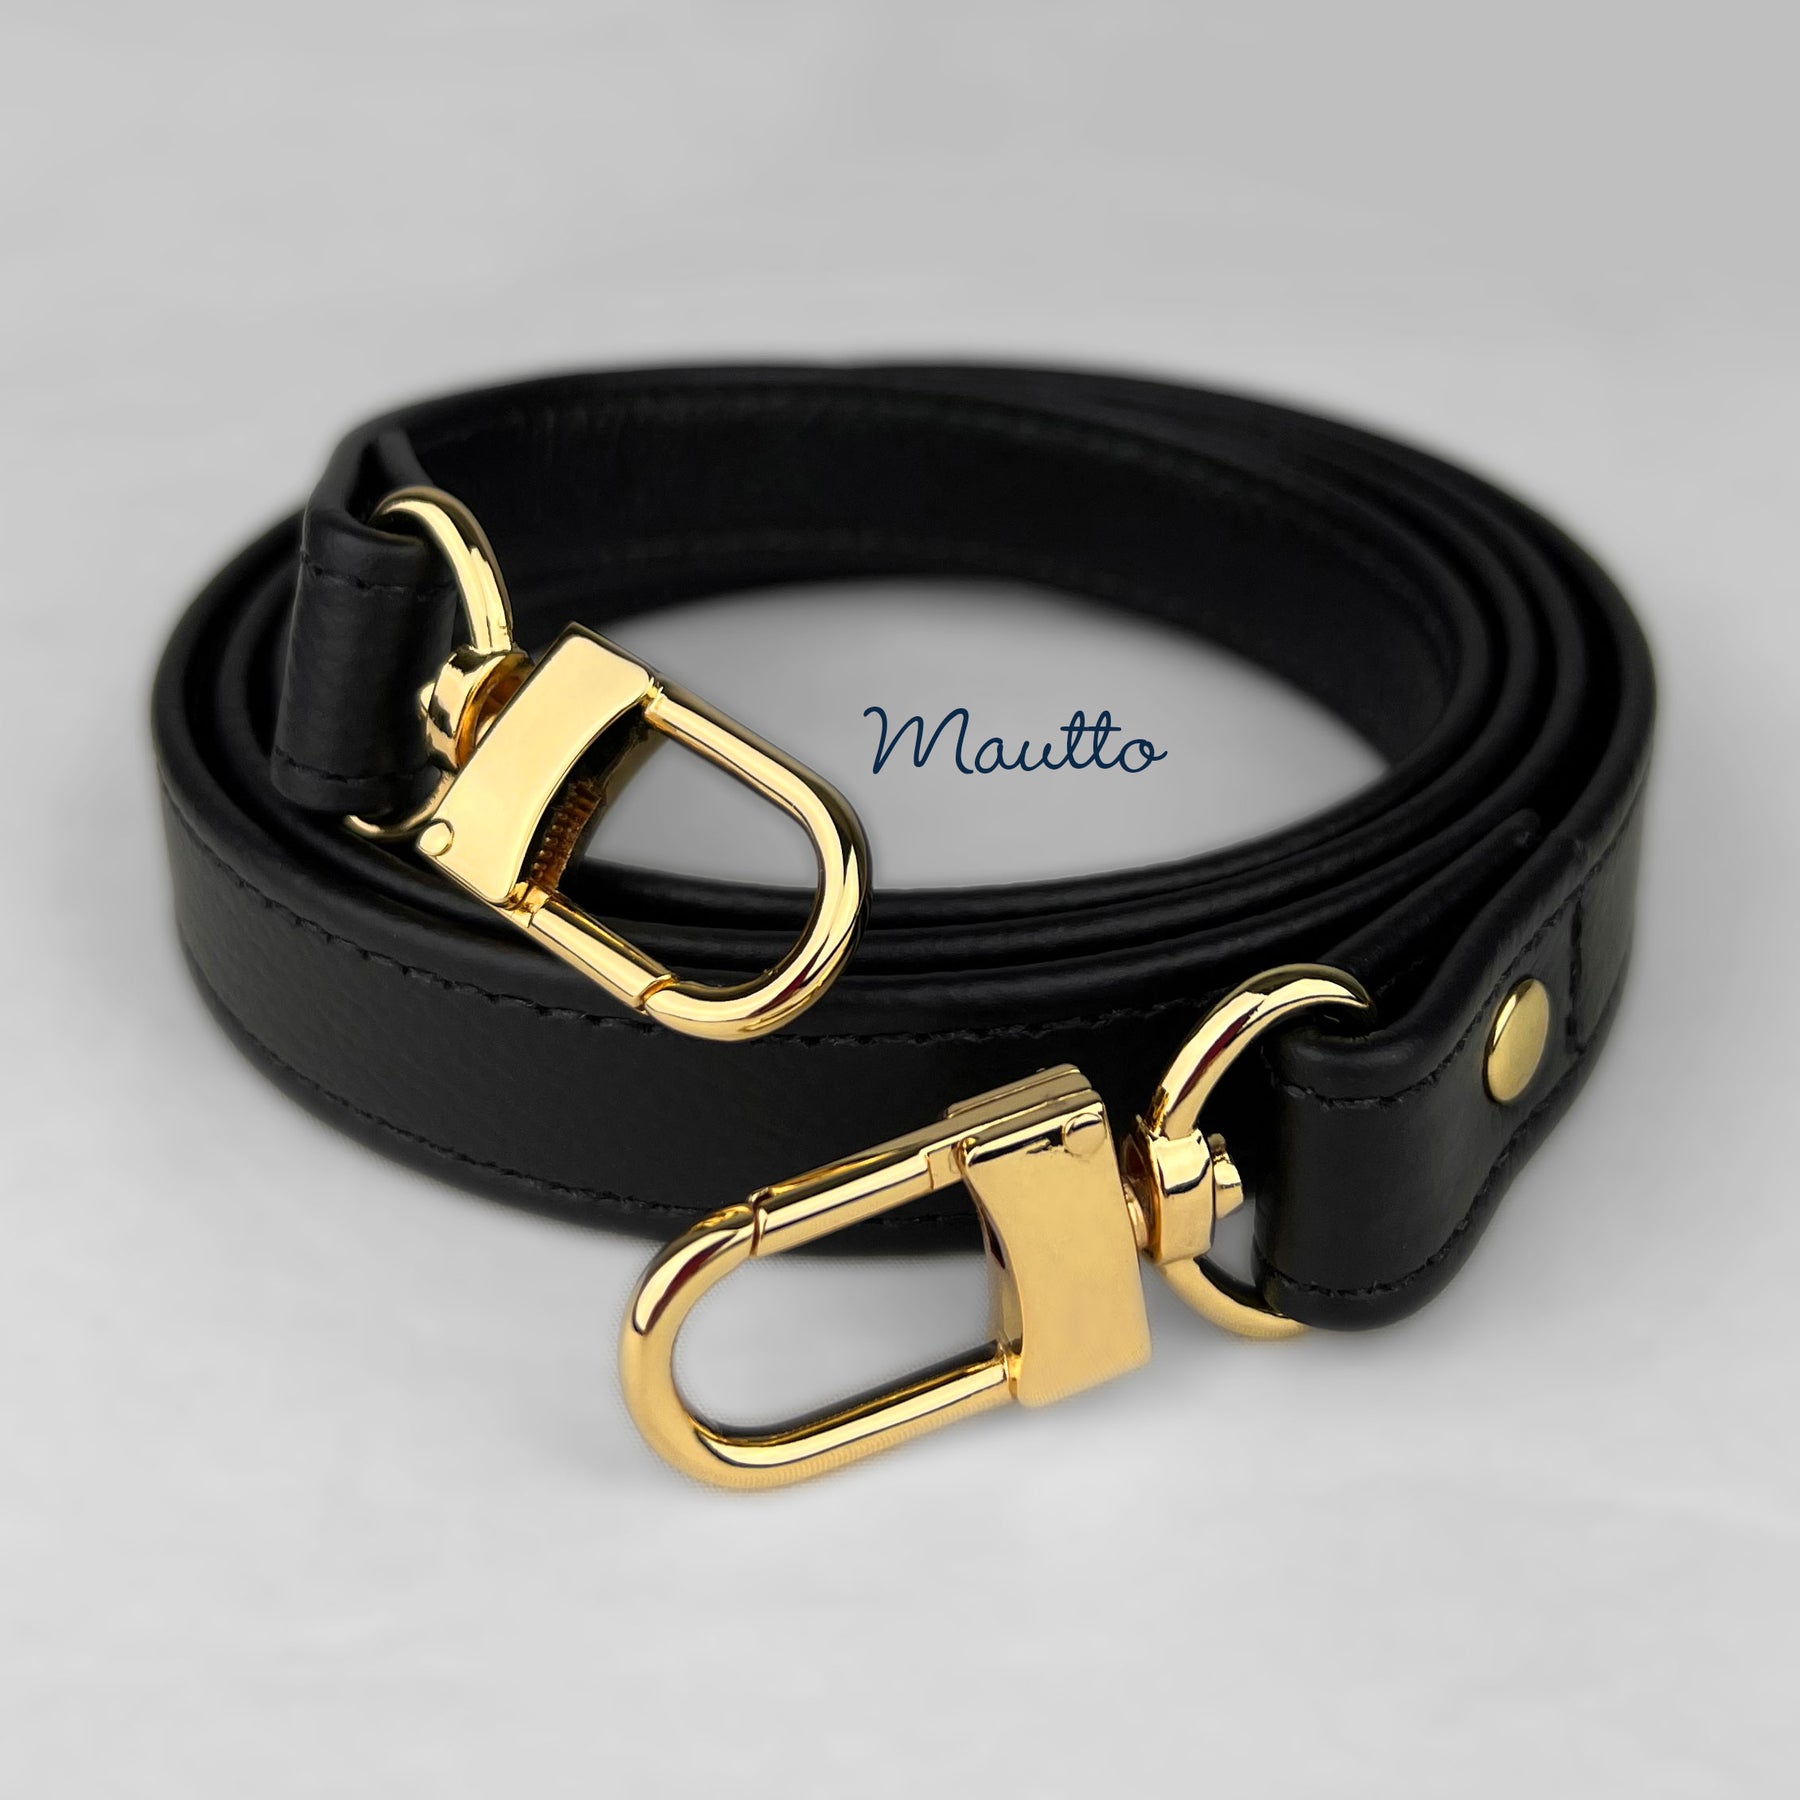 Black Pebble Leather Strap - 1 inch (25mm) Wide - Choose Length/Clips 40 Short Crossbody / Gold-Tone #19